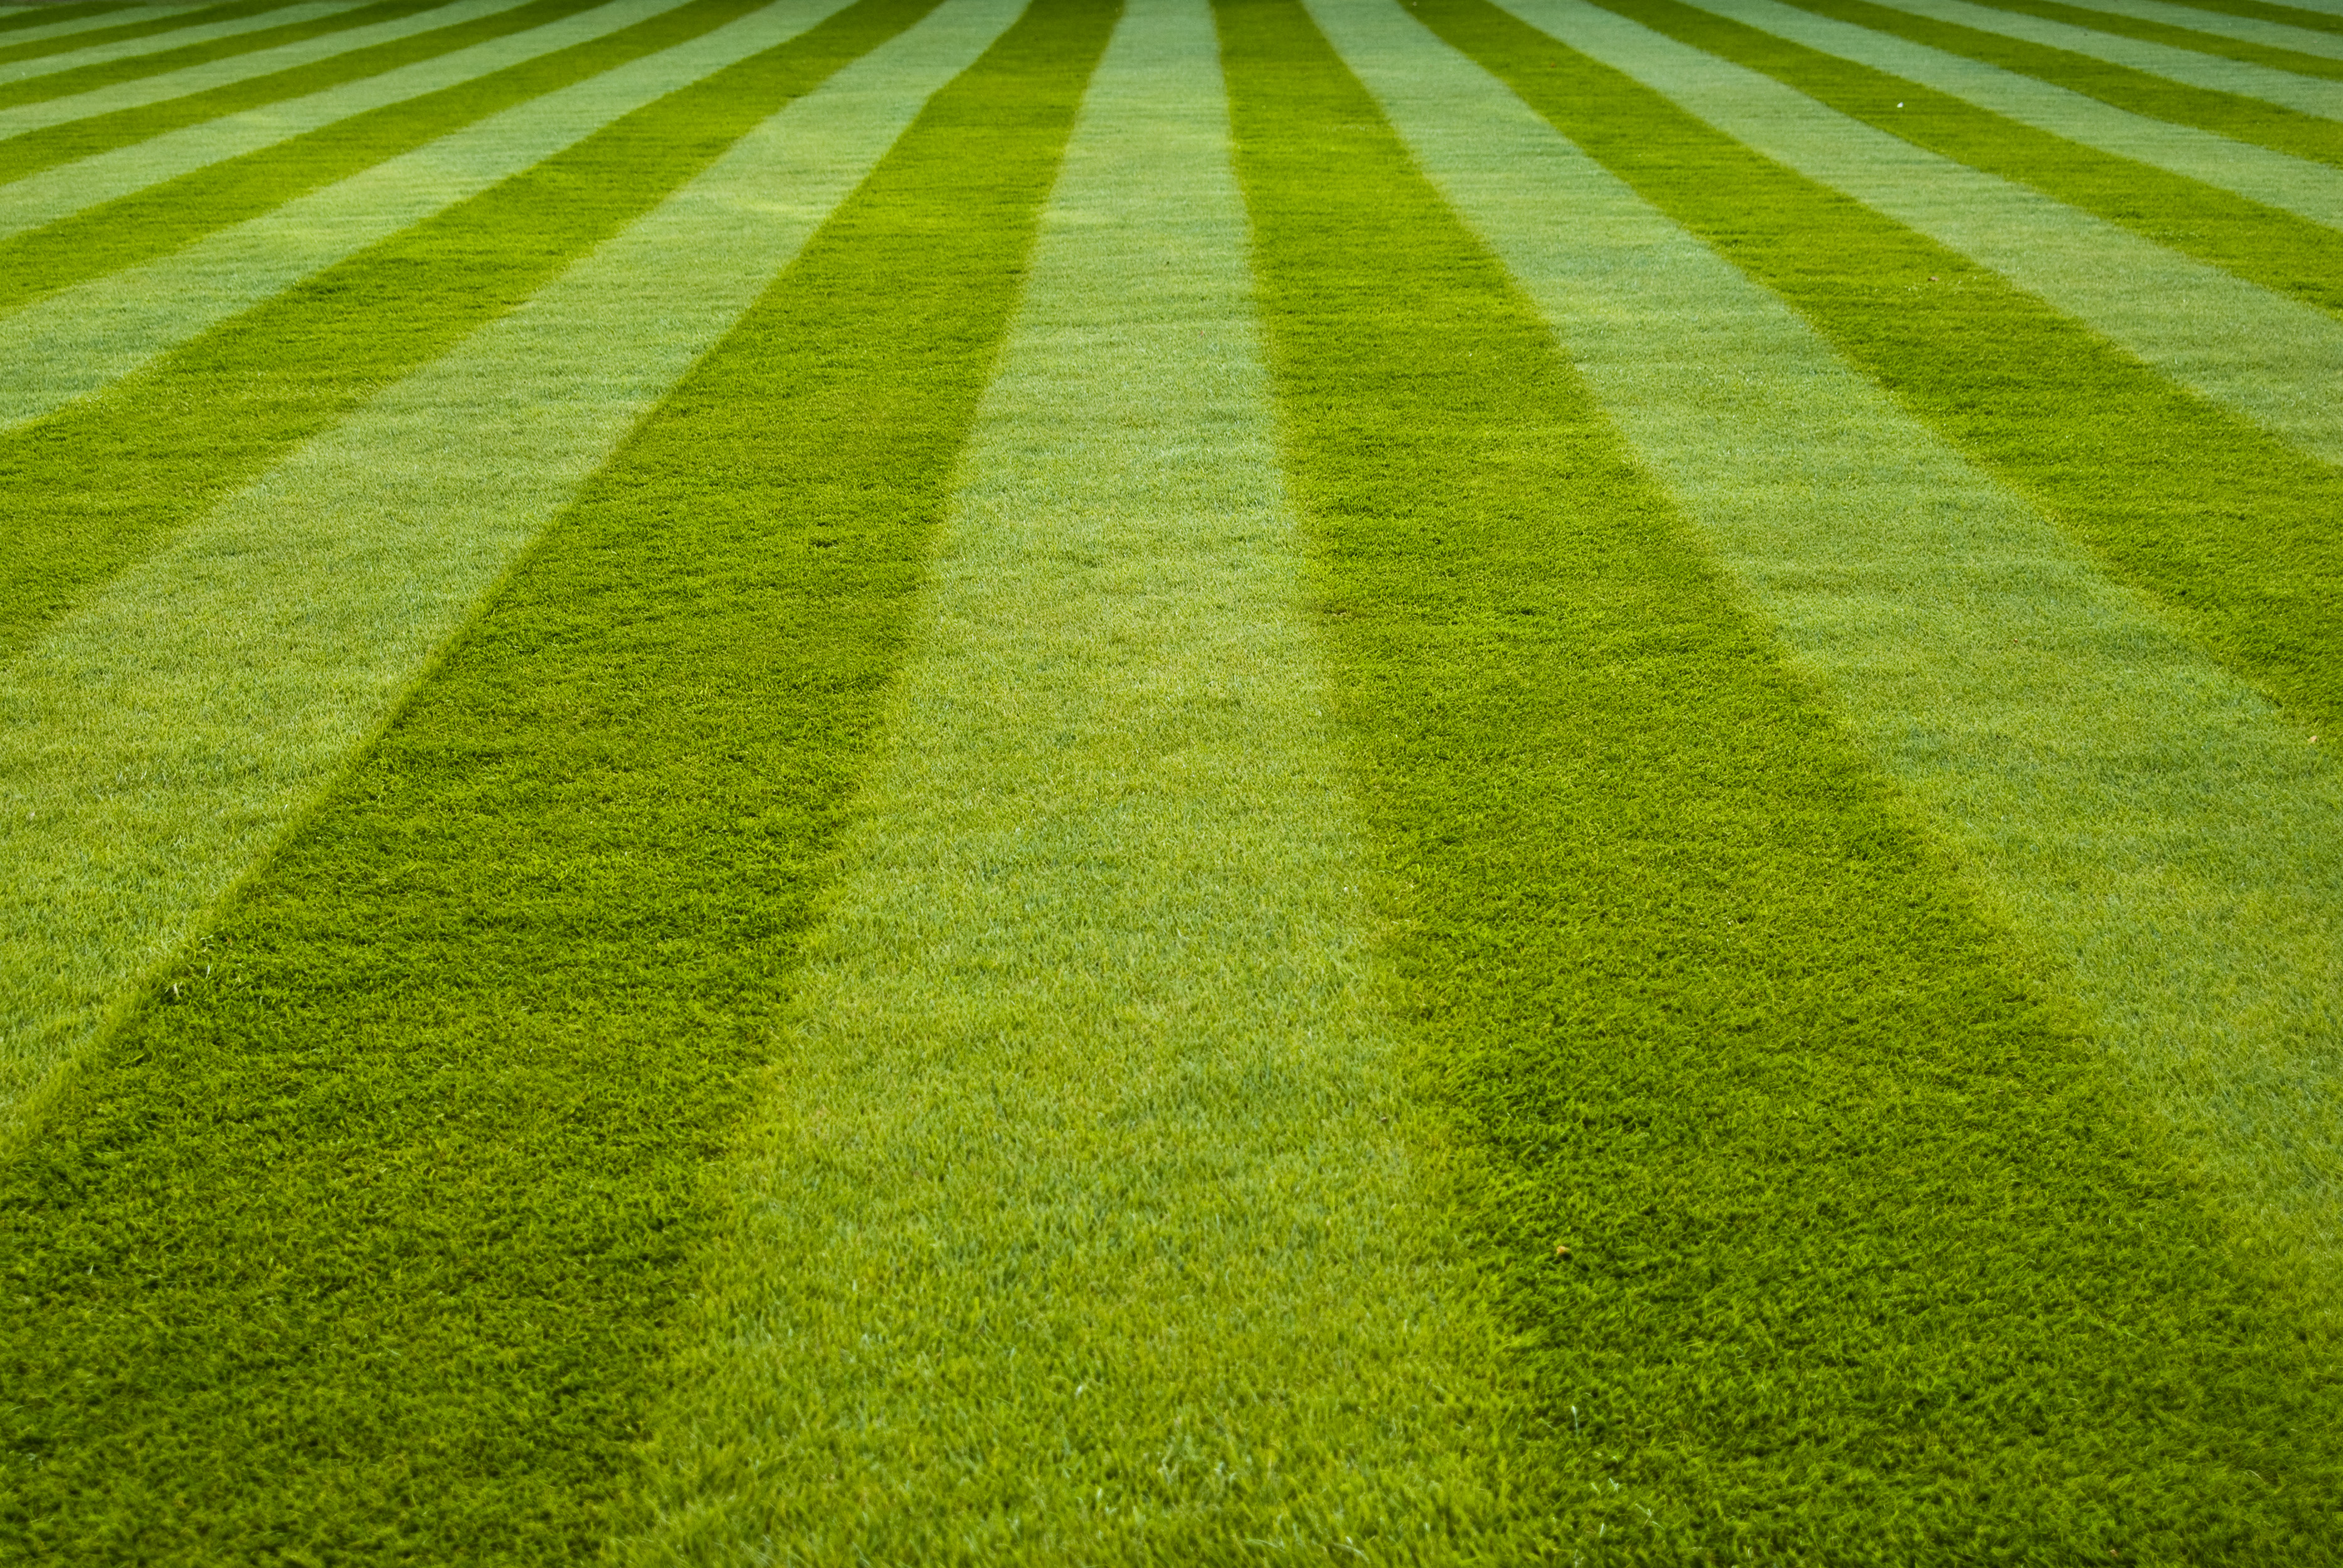 VitaStrength | There's No Such Thing as Greener Grass